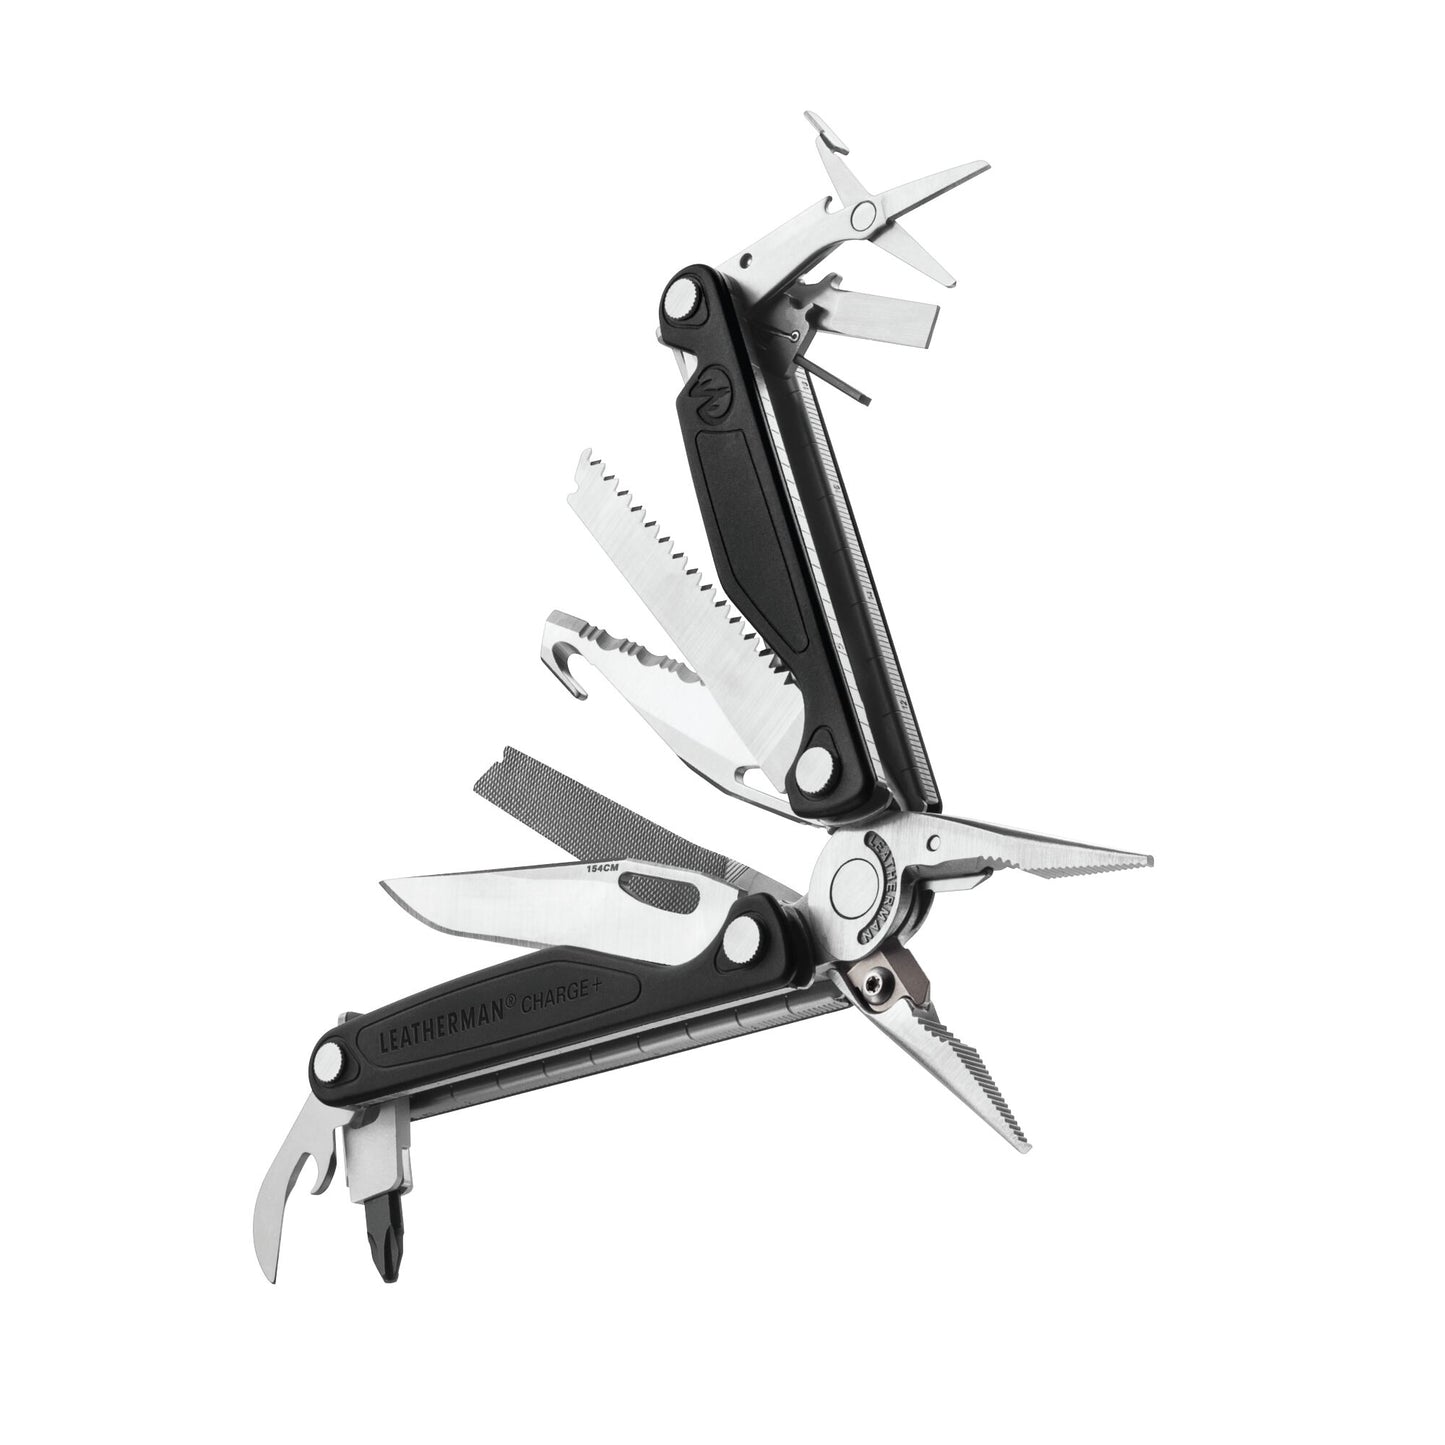 Pince Leatherman Charge+ (19 outils) - Leatherman-T.A DEFENSE